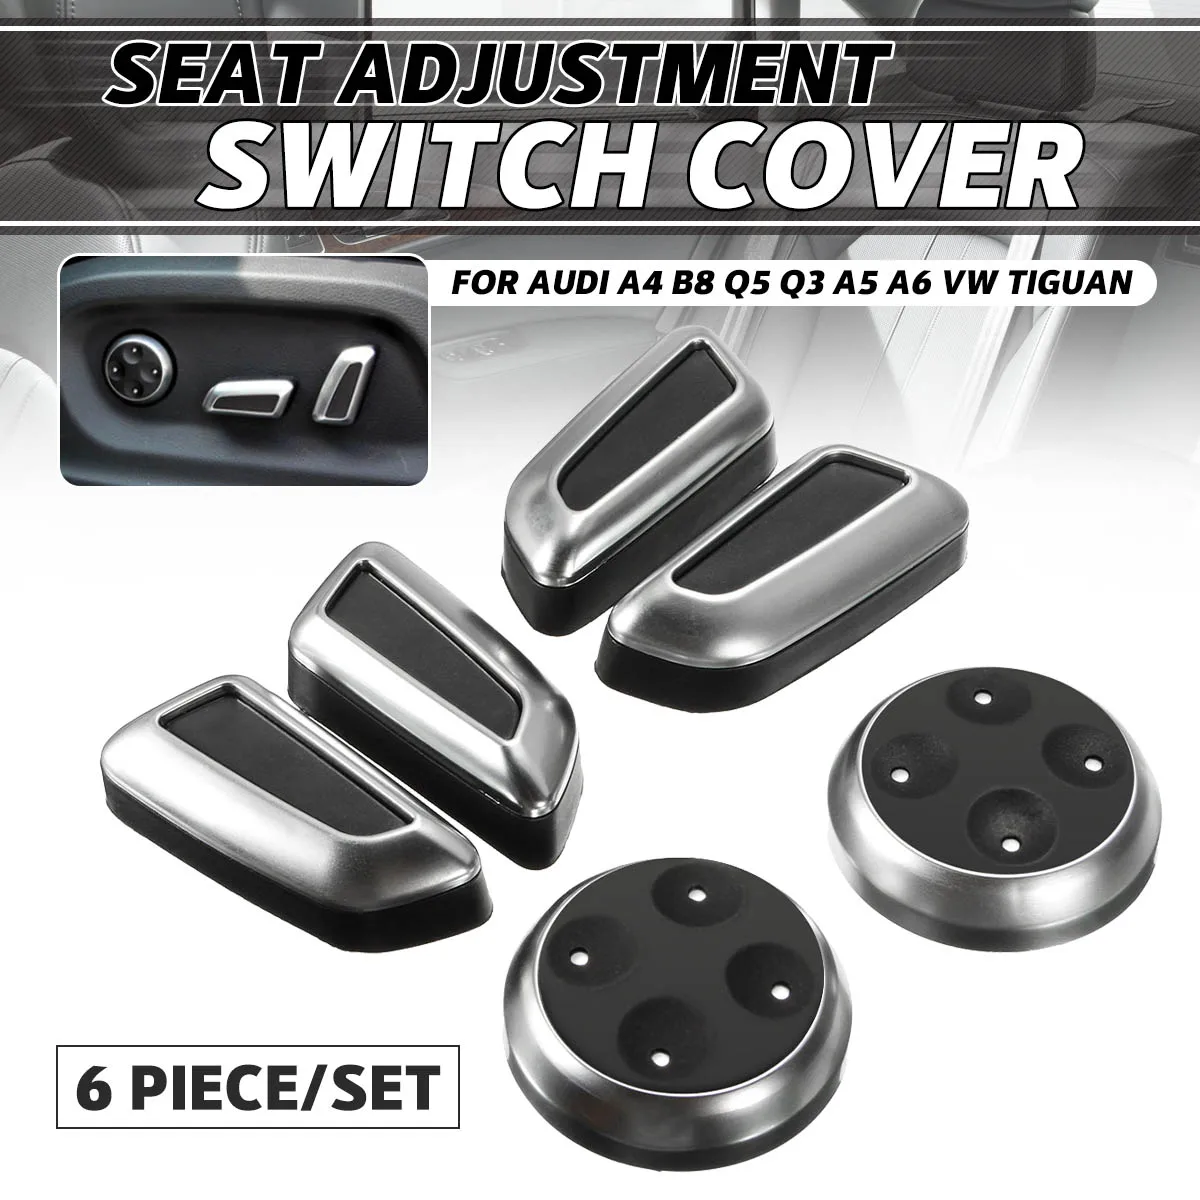 

New 6pcs/lot Car styling Interior Auto Seat Adjustment Switch Cover Trims Chromed Seat For Audi A3 A4 A5 A6 Q3 Q5 /VW /Tiguan